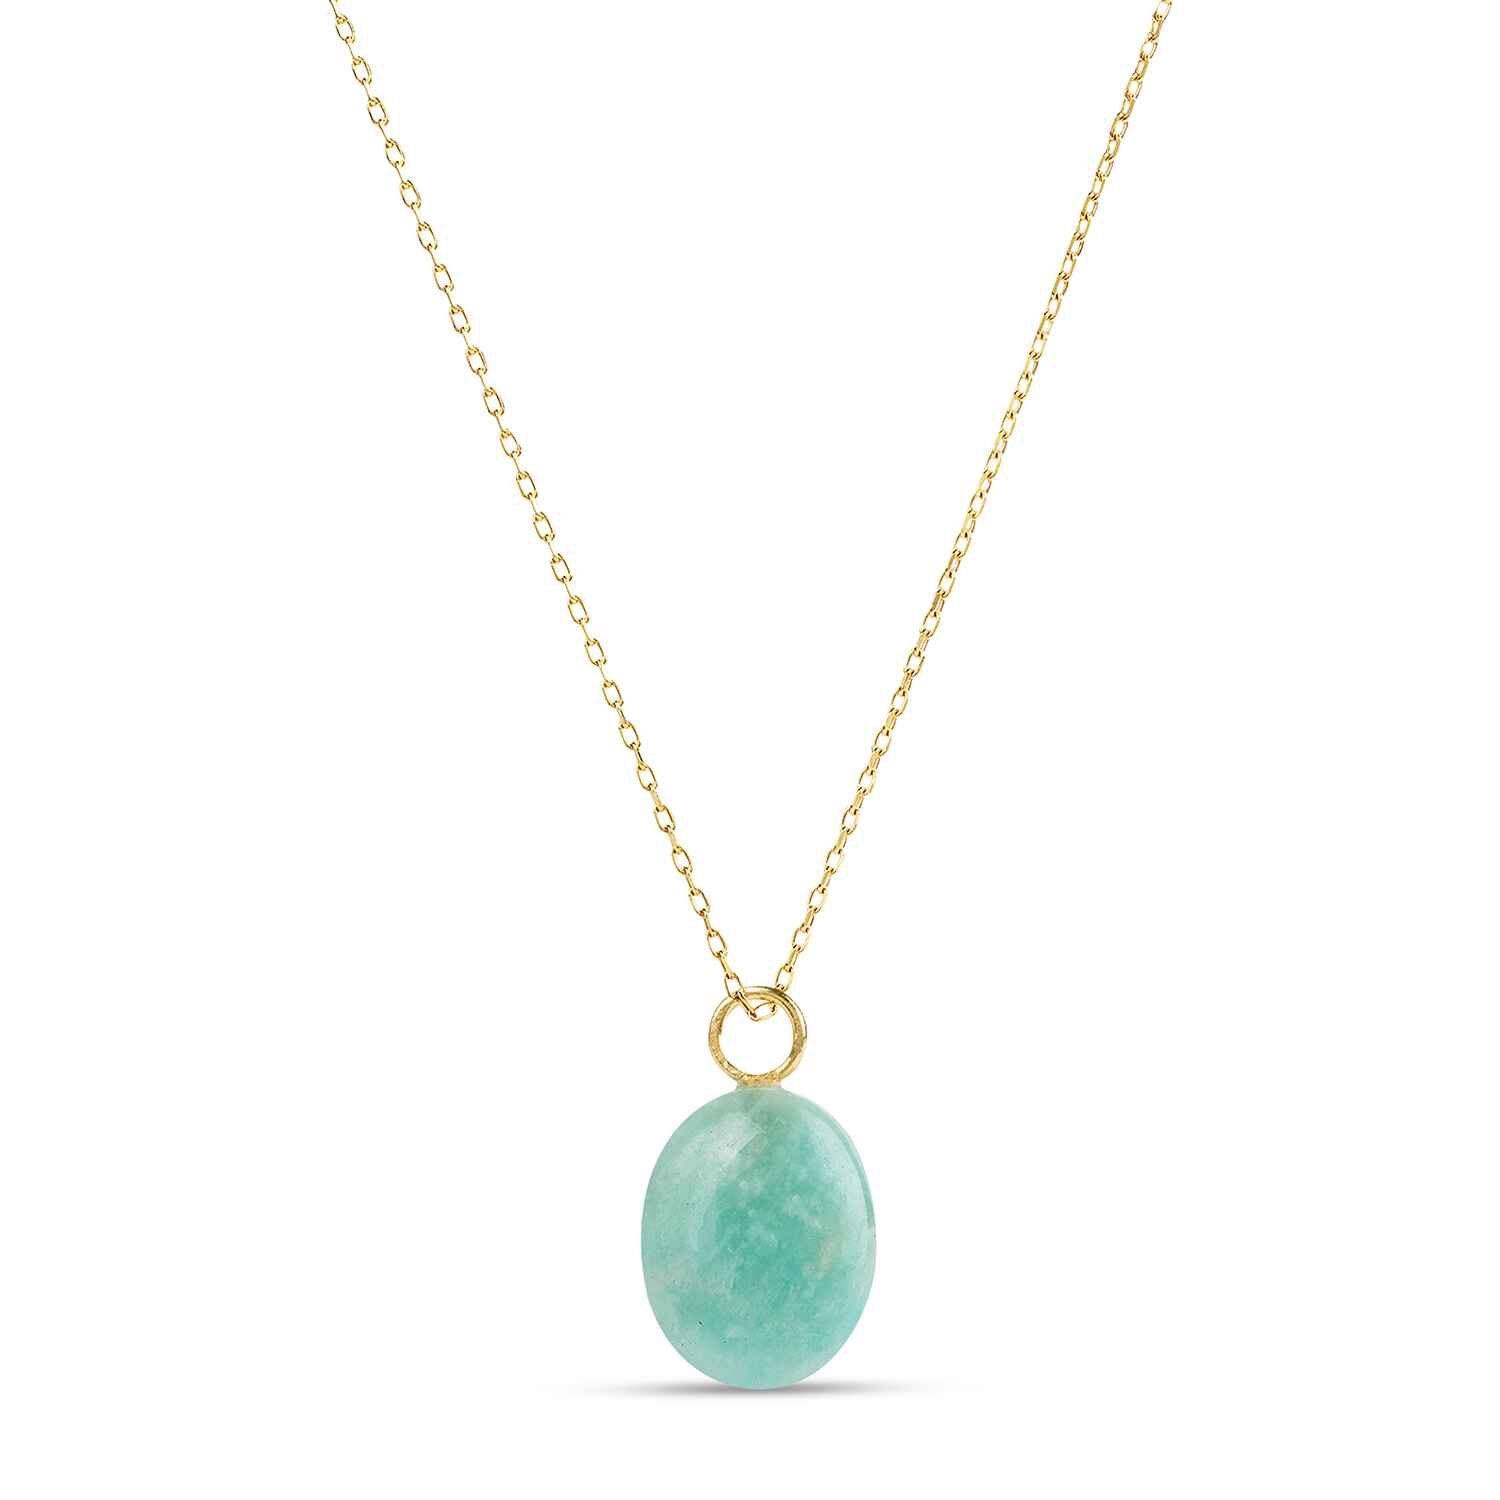 Put a gem in your life with the Eden Gold Chain Necklace with Amazonite Pendant. Handmade with sustainable materials, this necklace is simple and chic for every day wear.